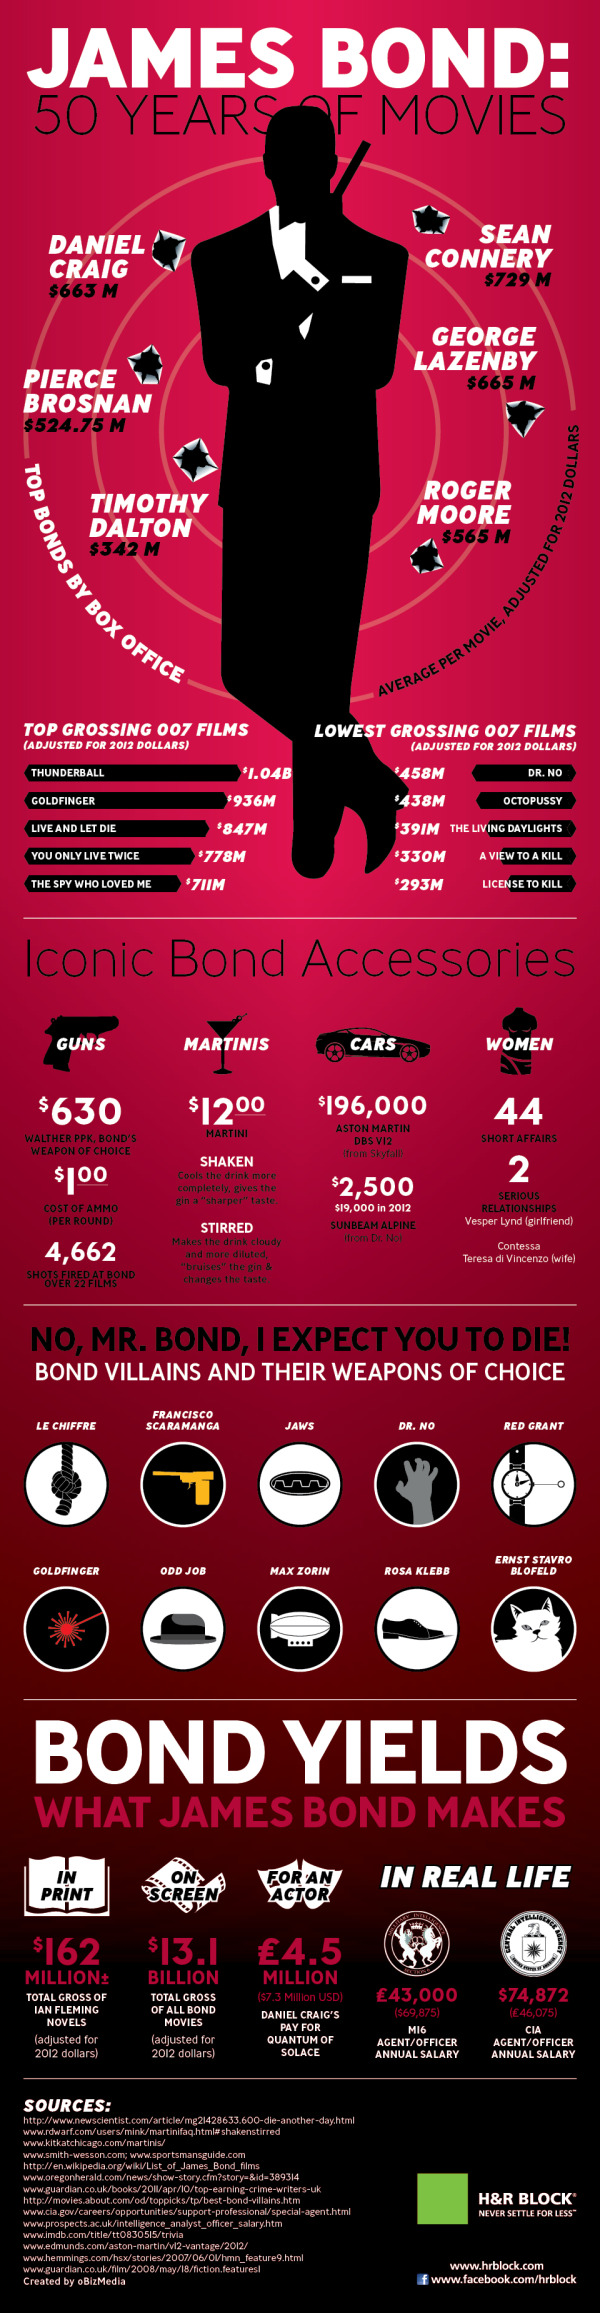 James Bond: 50 Years of Movies infographic